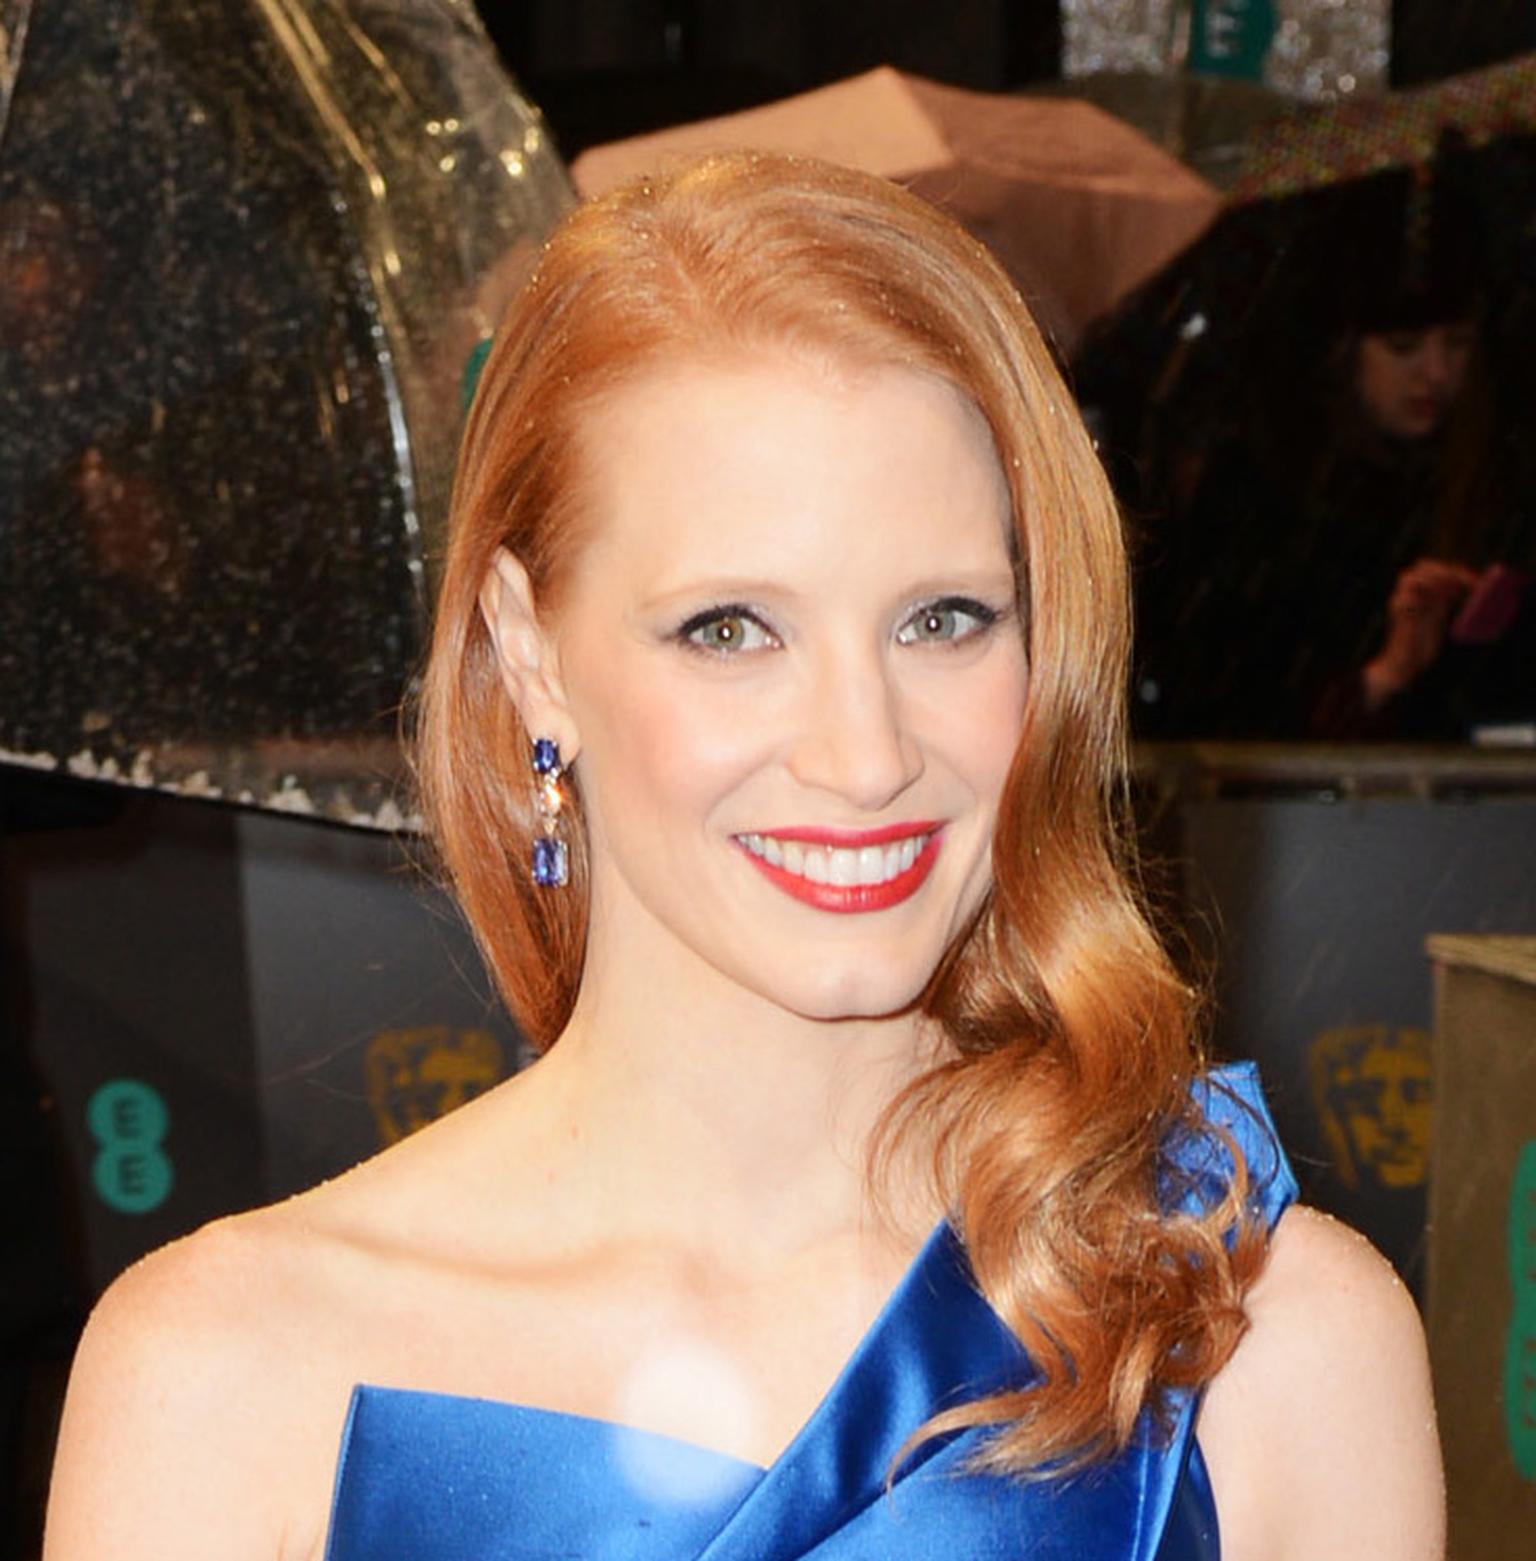 Jessica Chastain arriving at the 2013 BAFTAs in Harry Winston sapphire and diamond earrings, set in platinum